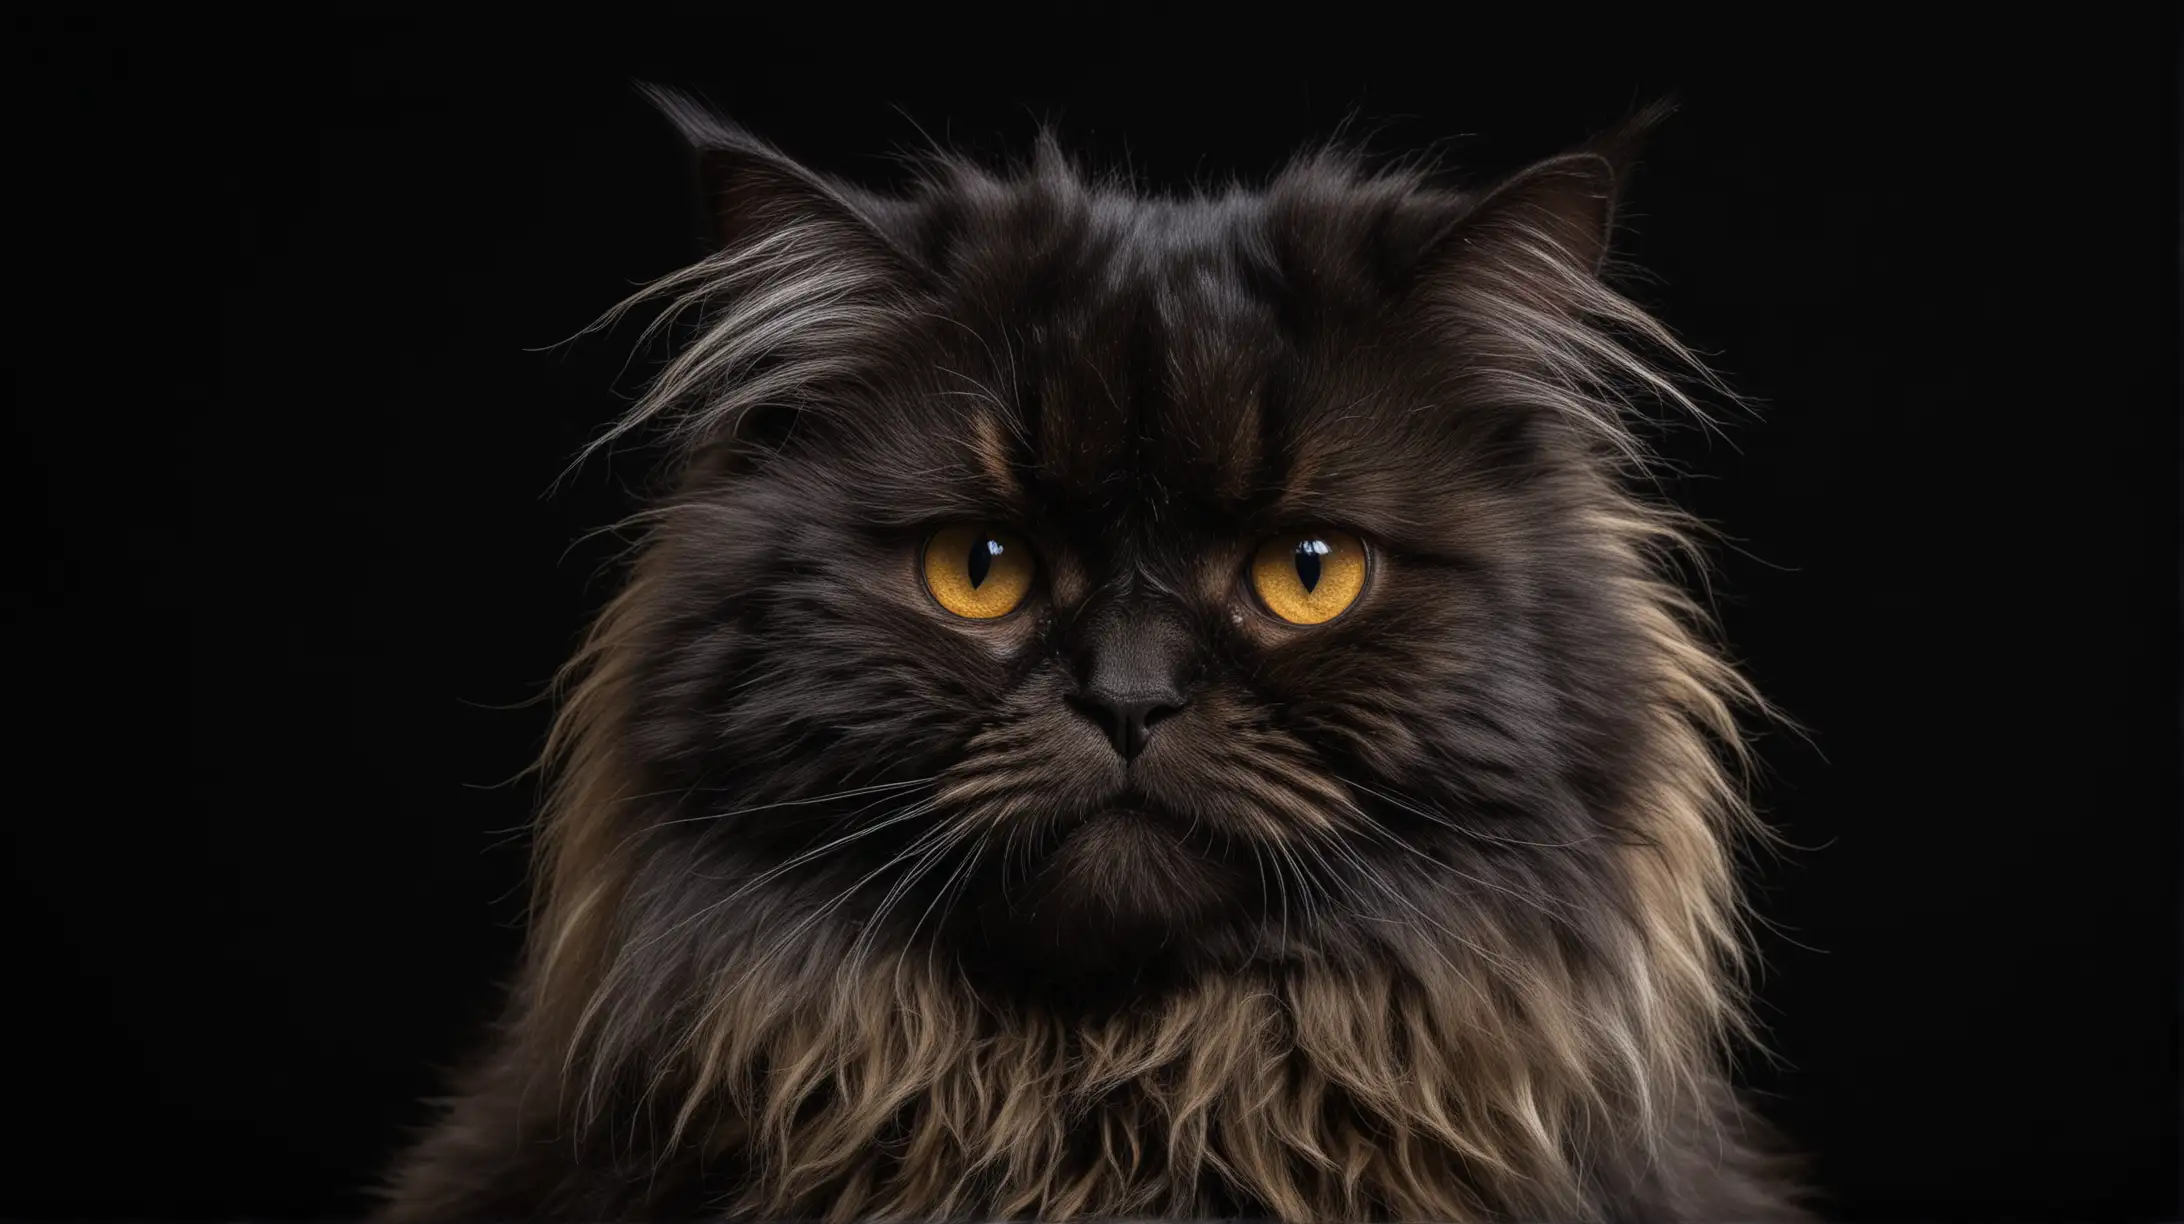 Beautiful Hairy Cat Poses for Camera against Dark Background